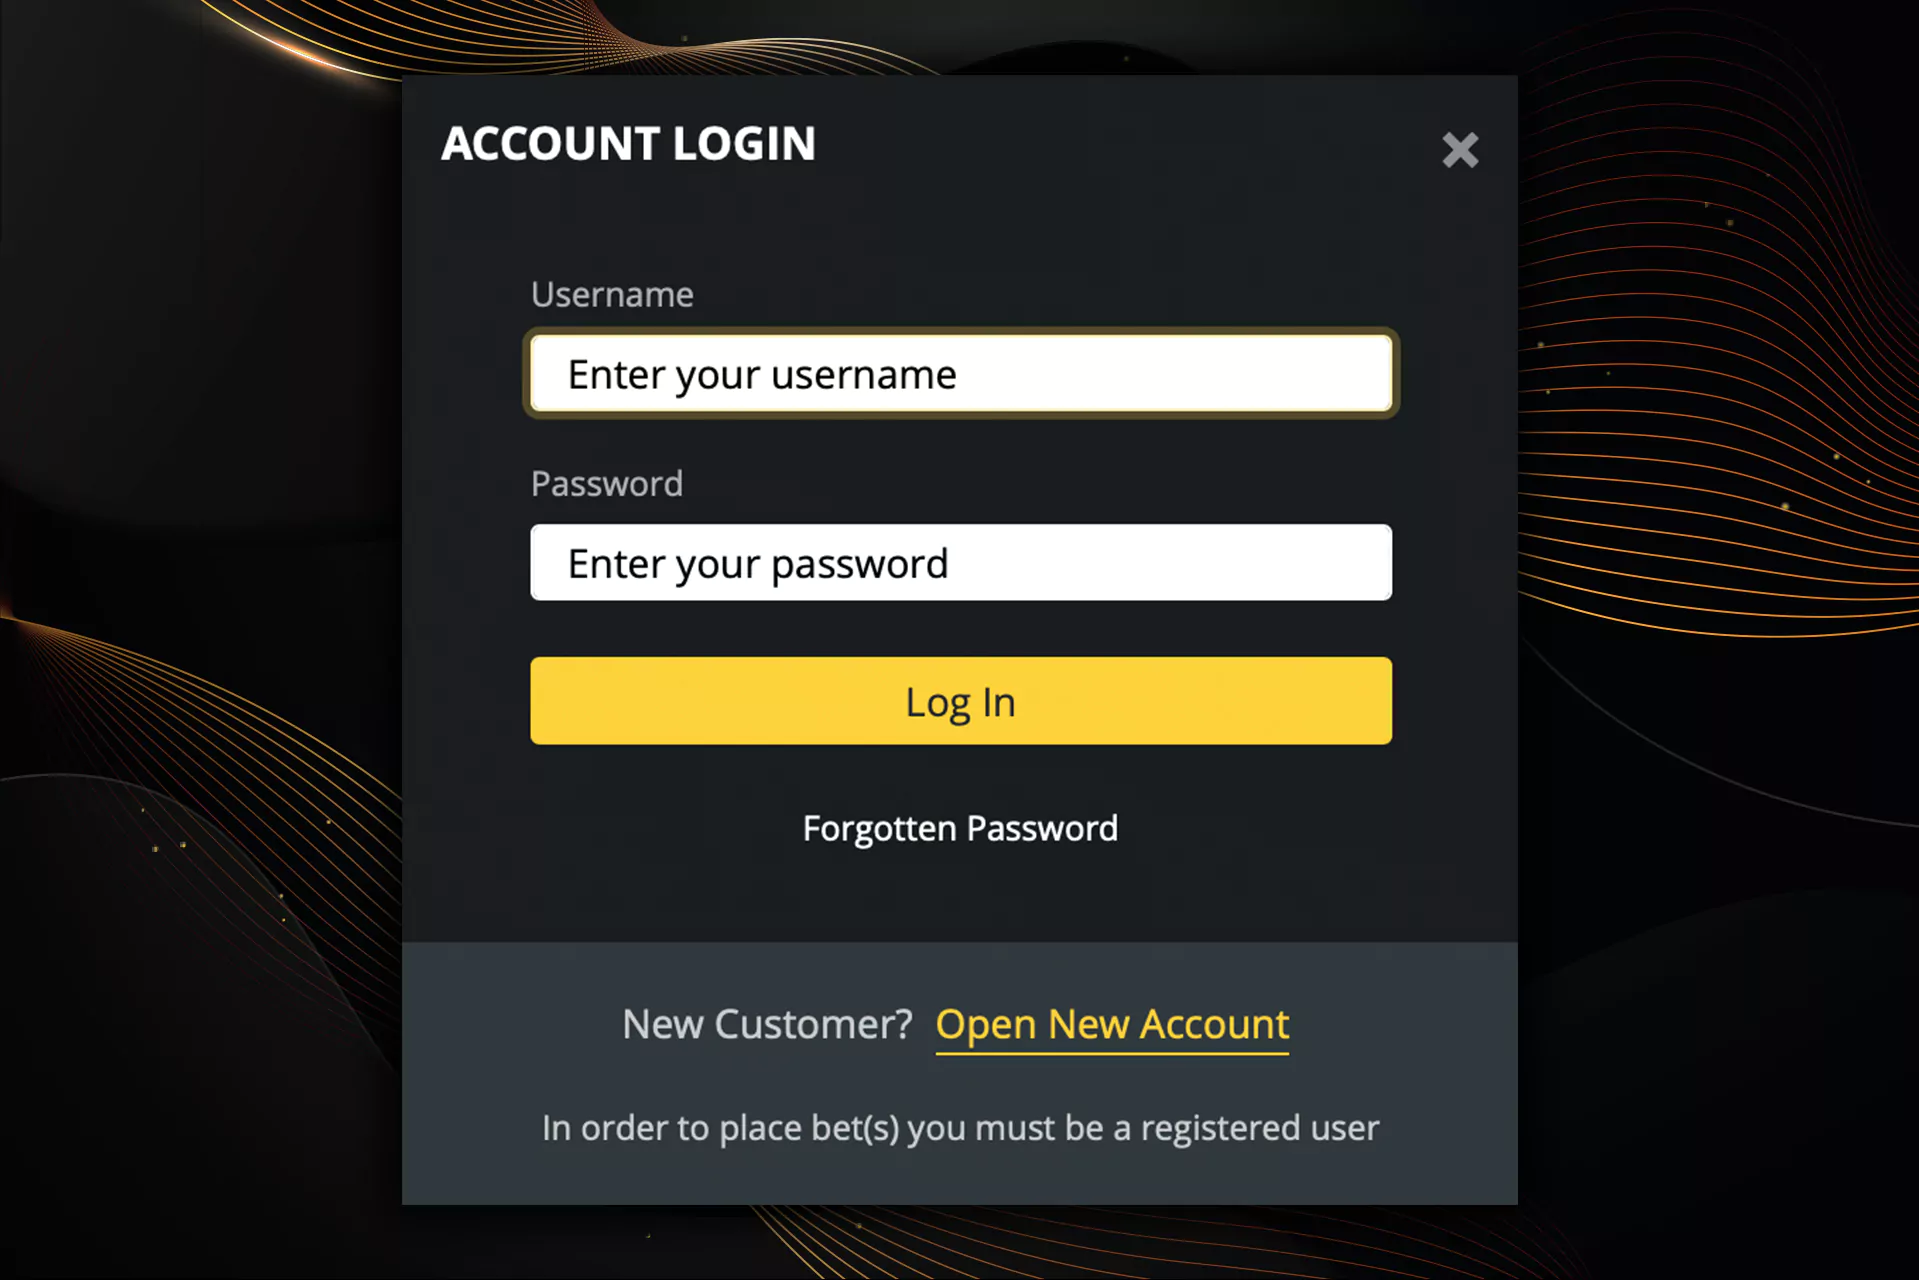 Use your email and password to log in to Bet O Bet.